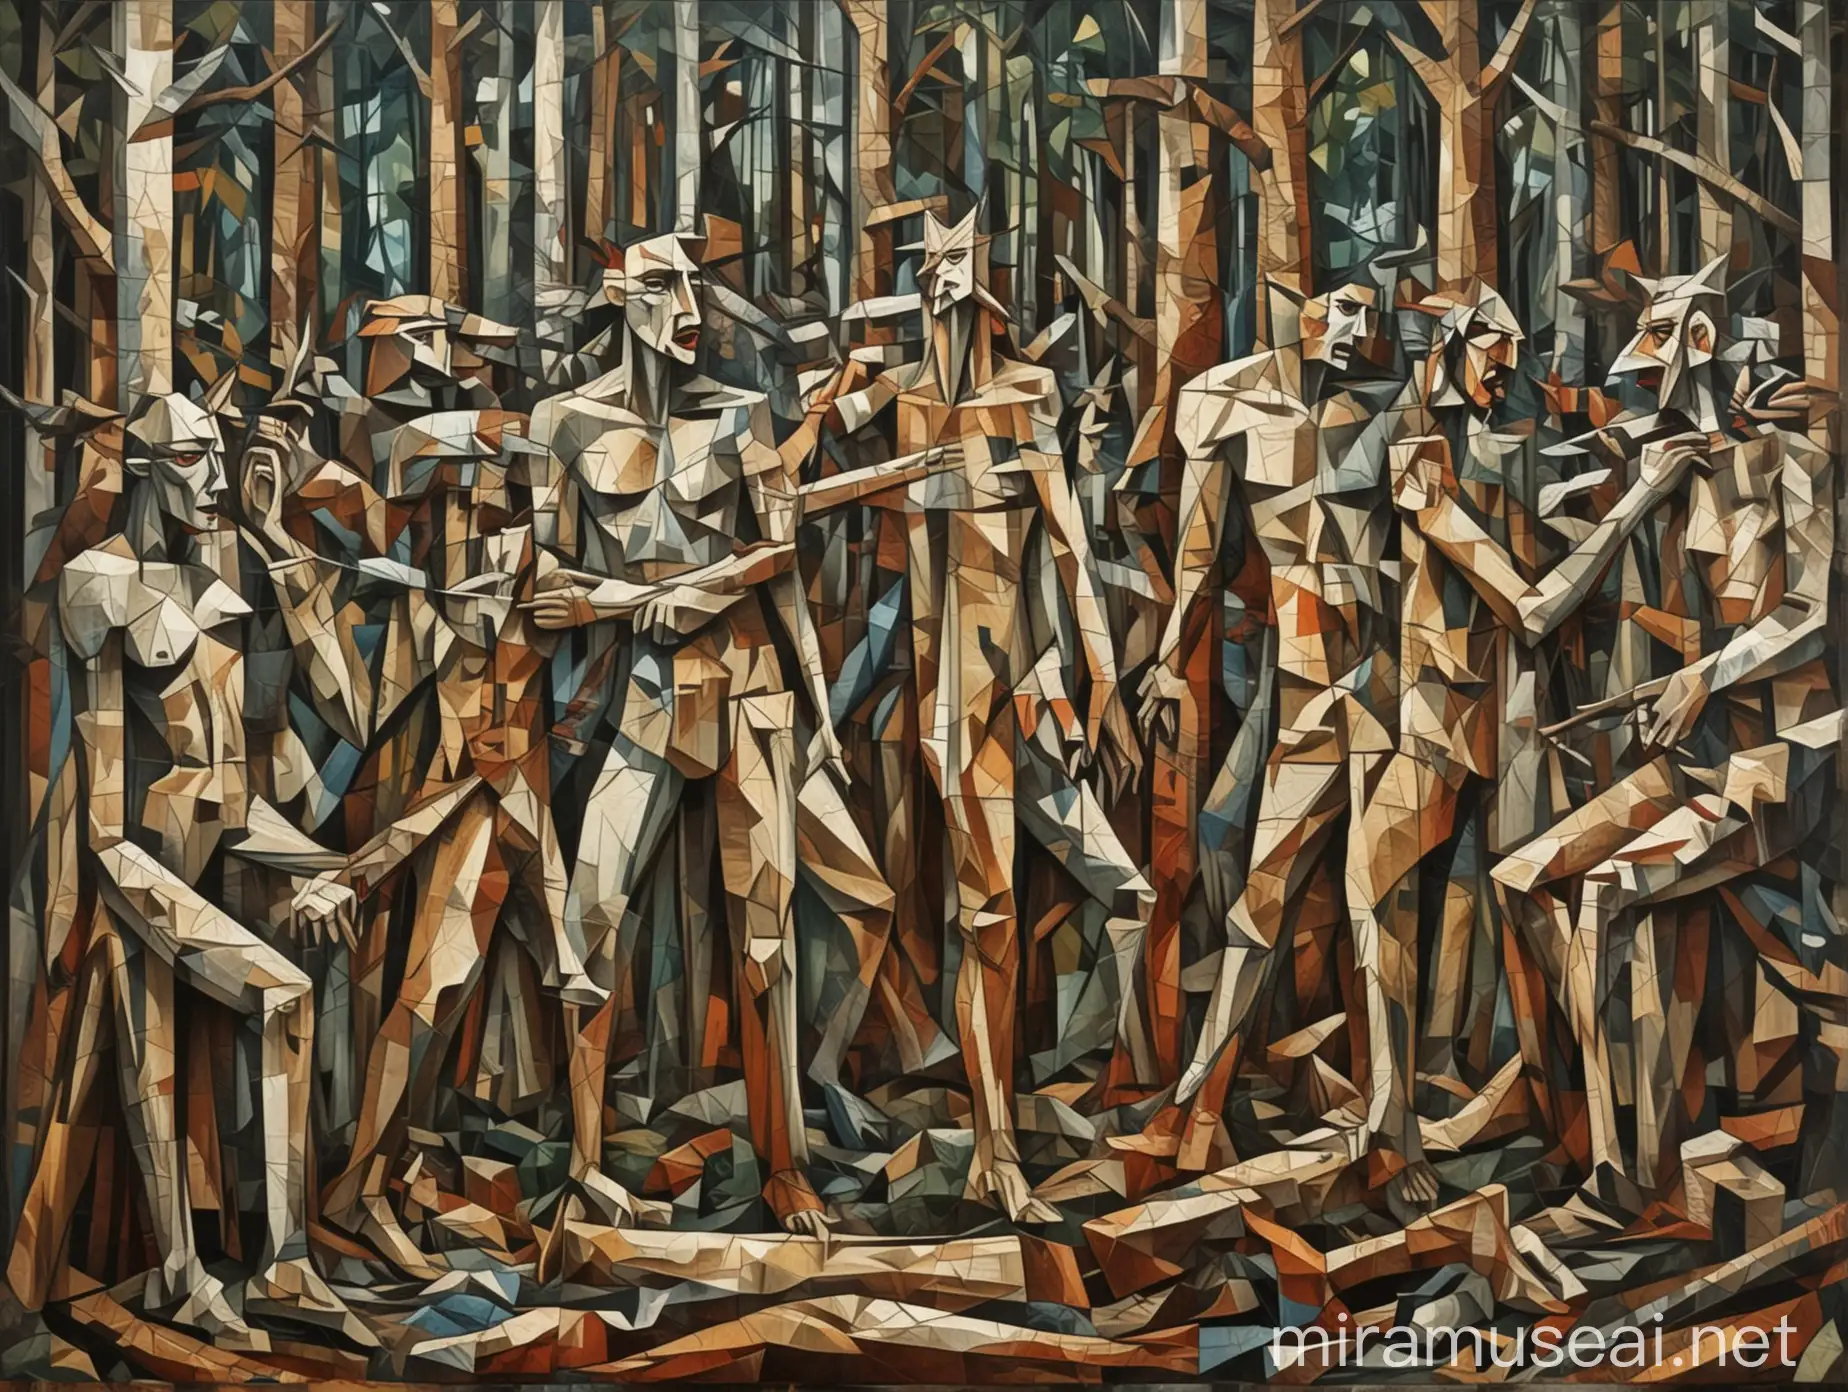 Cubist painting of wild people who massacre the trees